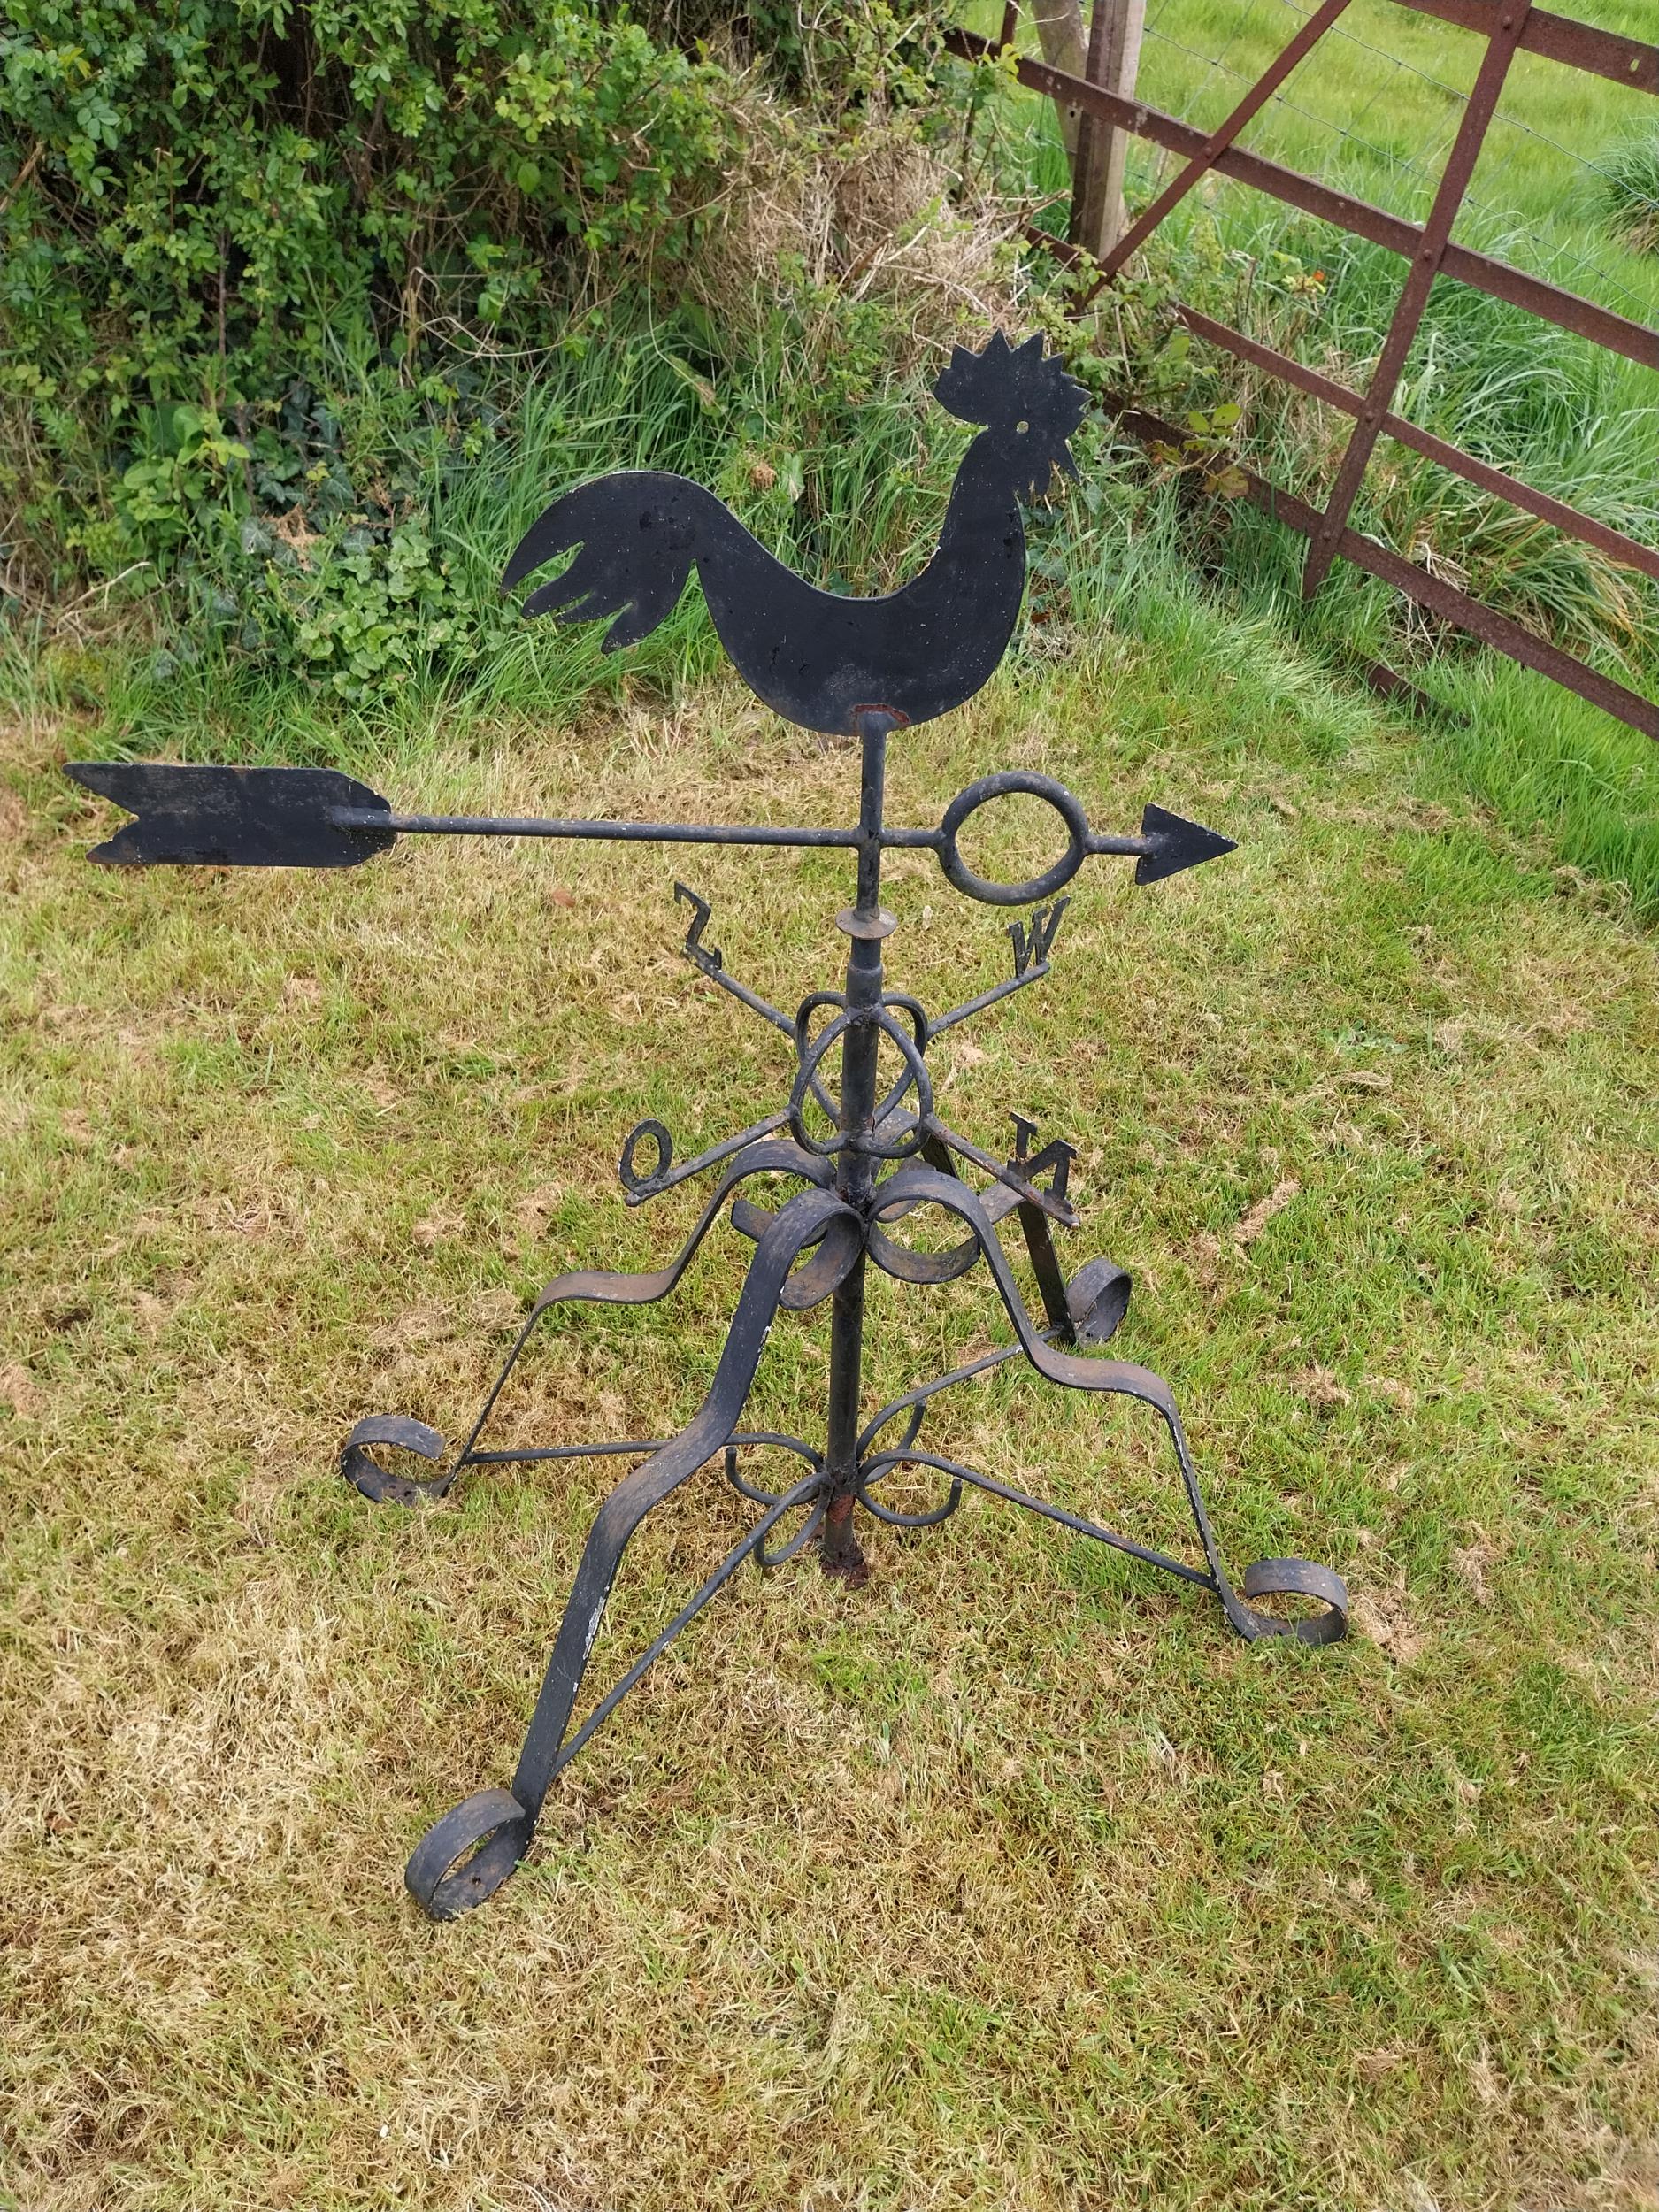 Wrought iron weather vain Rooster {117 cm H x 116 cm W x 99 cm D}. - Image 6 of 6